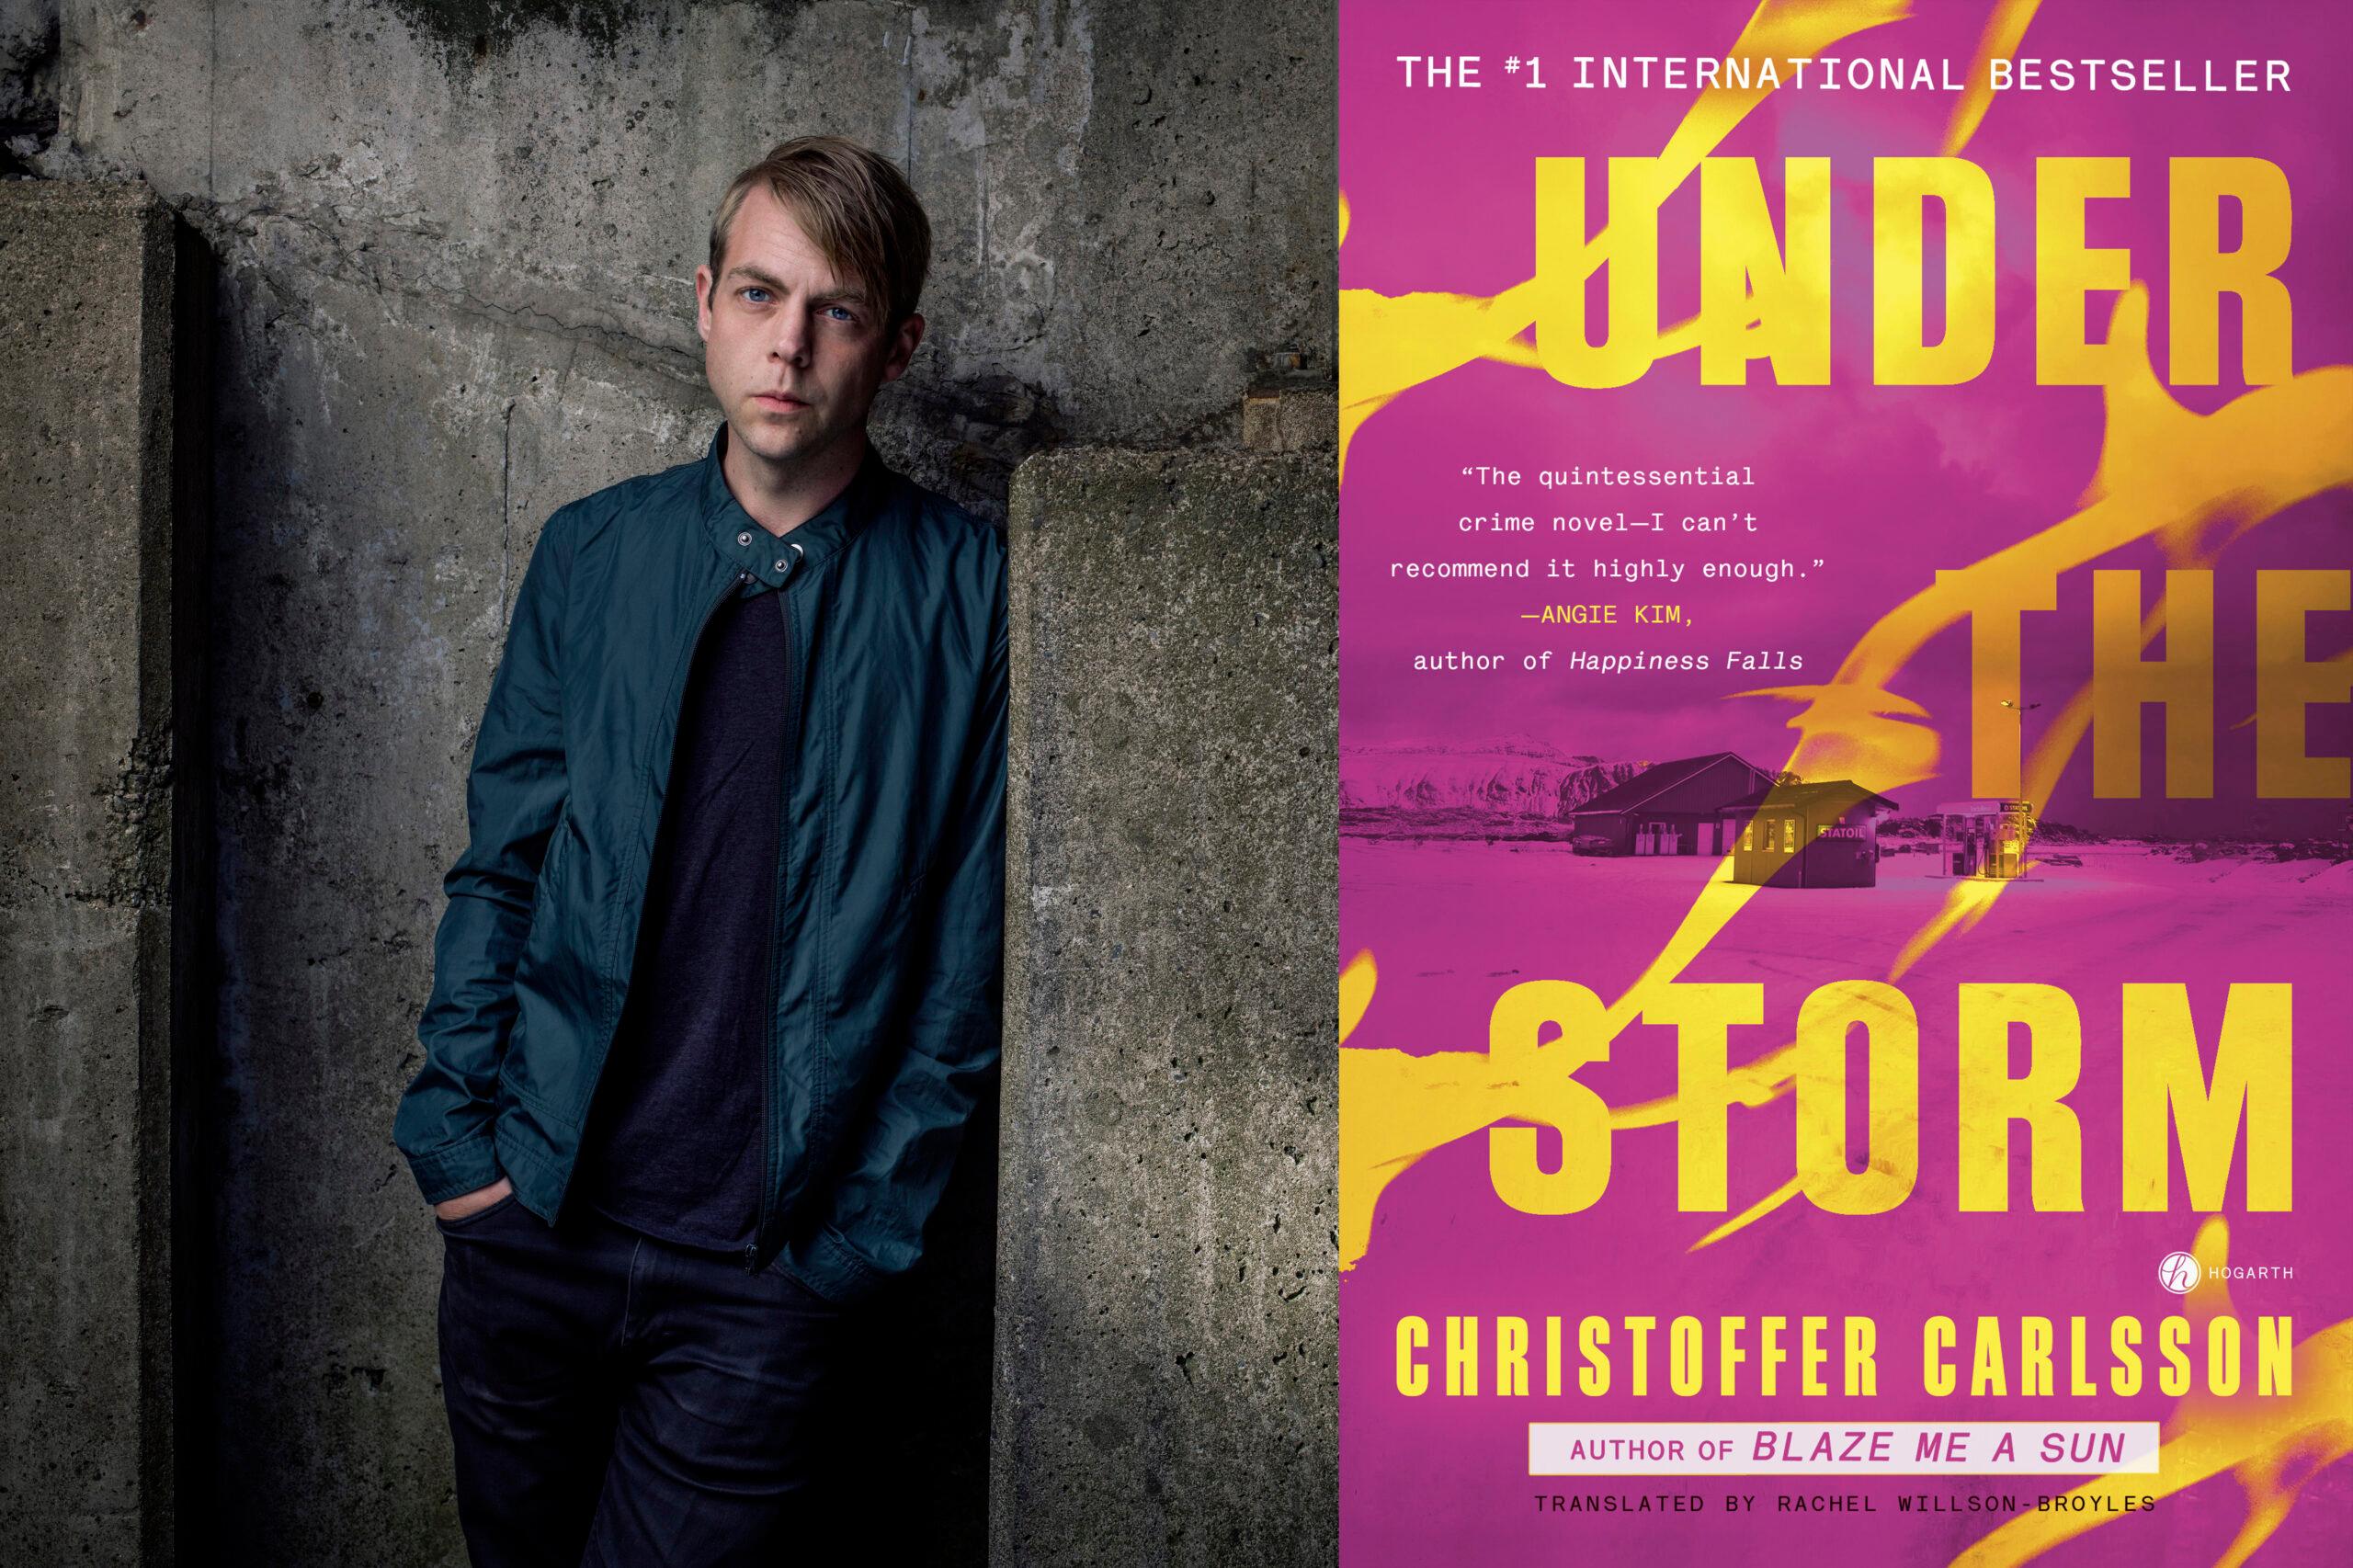 Portrait of a man to the left and the cover of a book entitled 'Under the Storm' to the right.